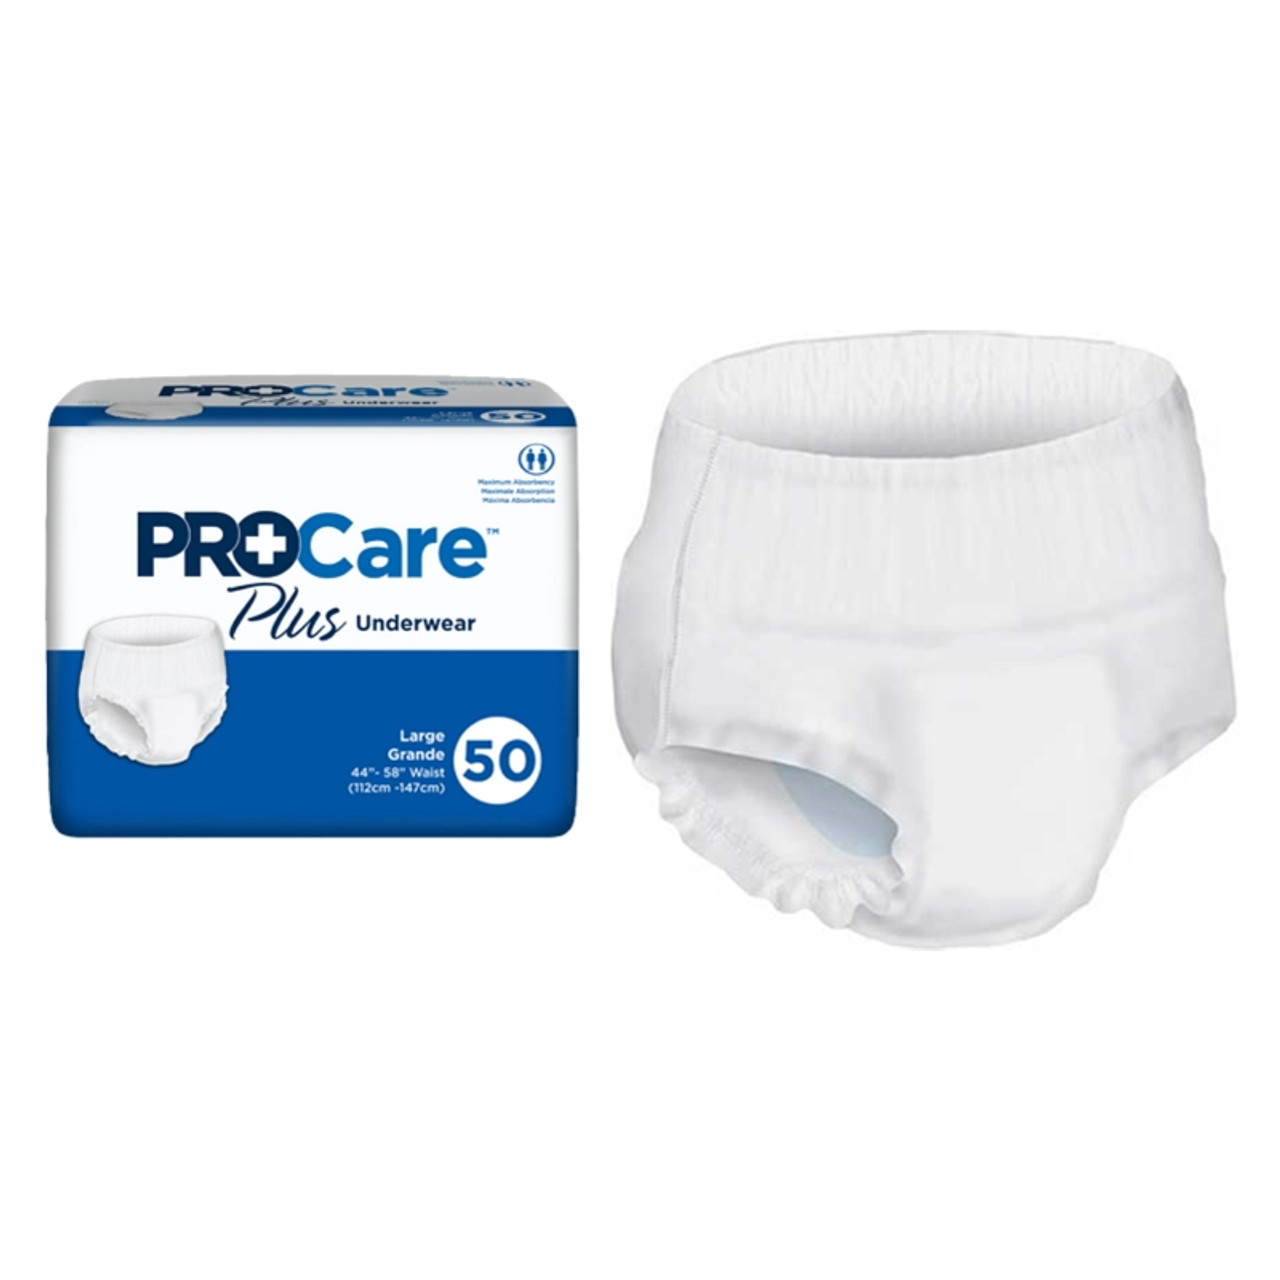 First Quality PFM-513 - Prevail Per-Fit Protective Underwear for